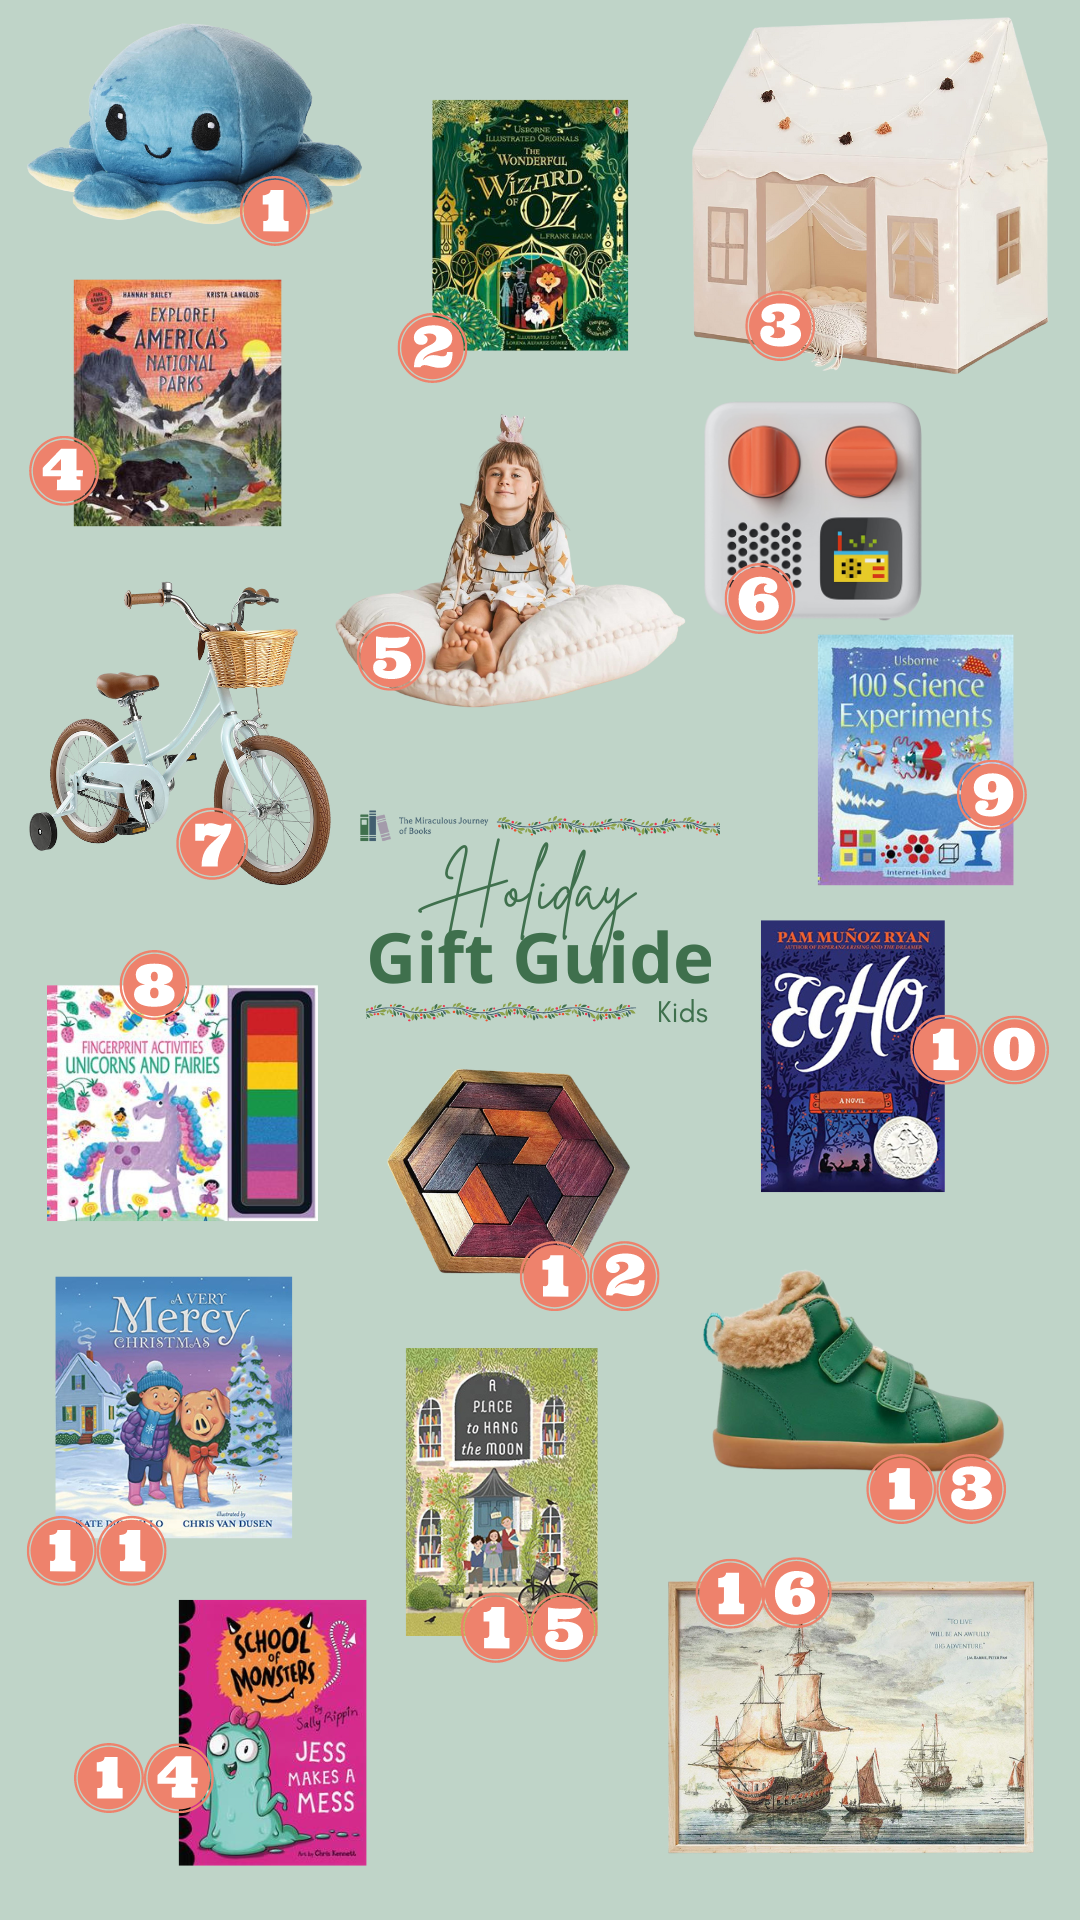 Holiday Gift Guide for Kids